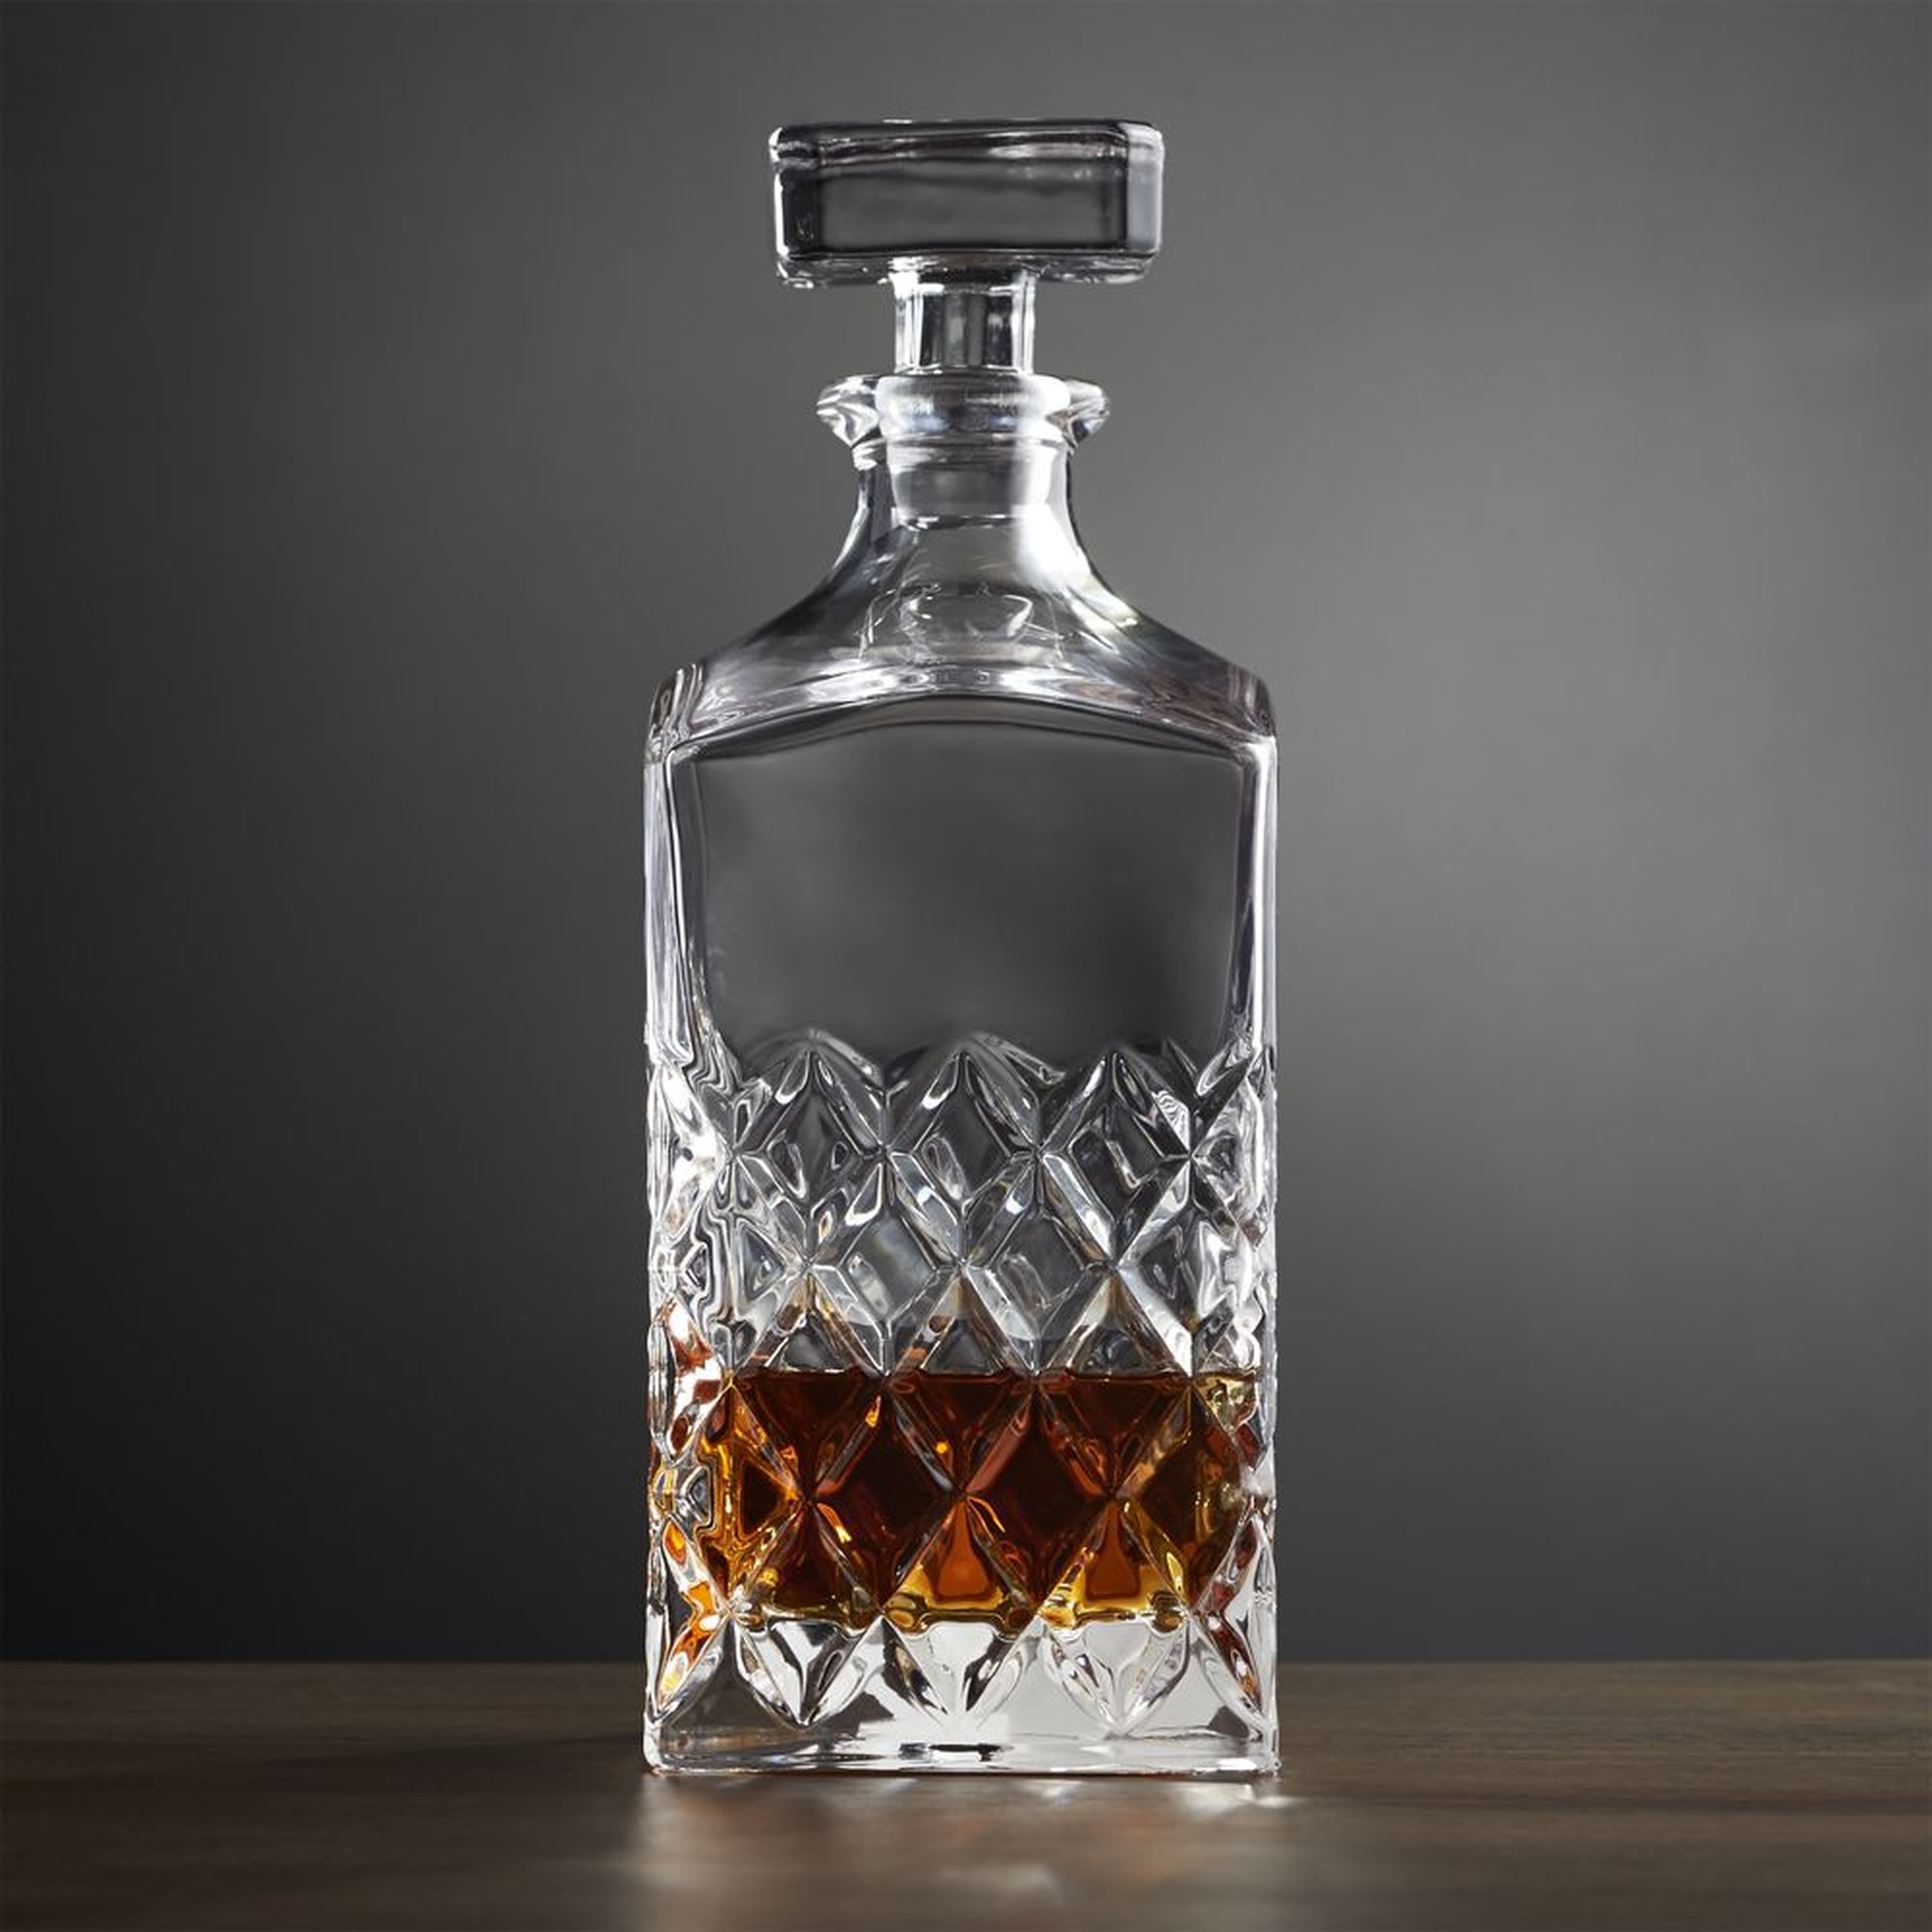 Hatch Decanter - Crate and Barrel